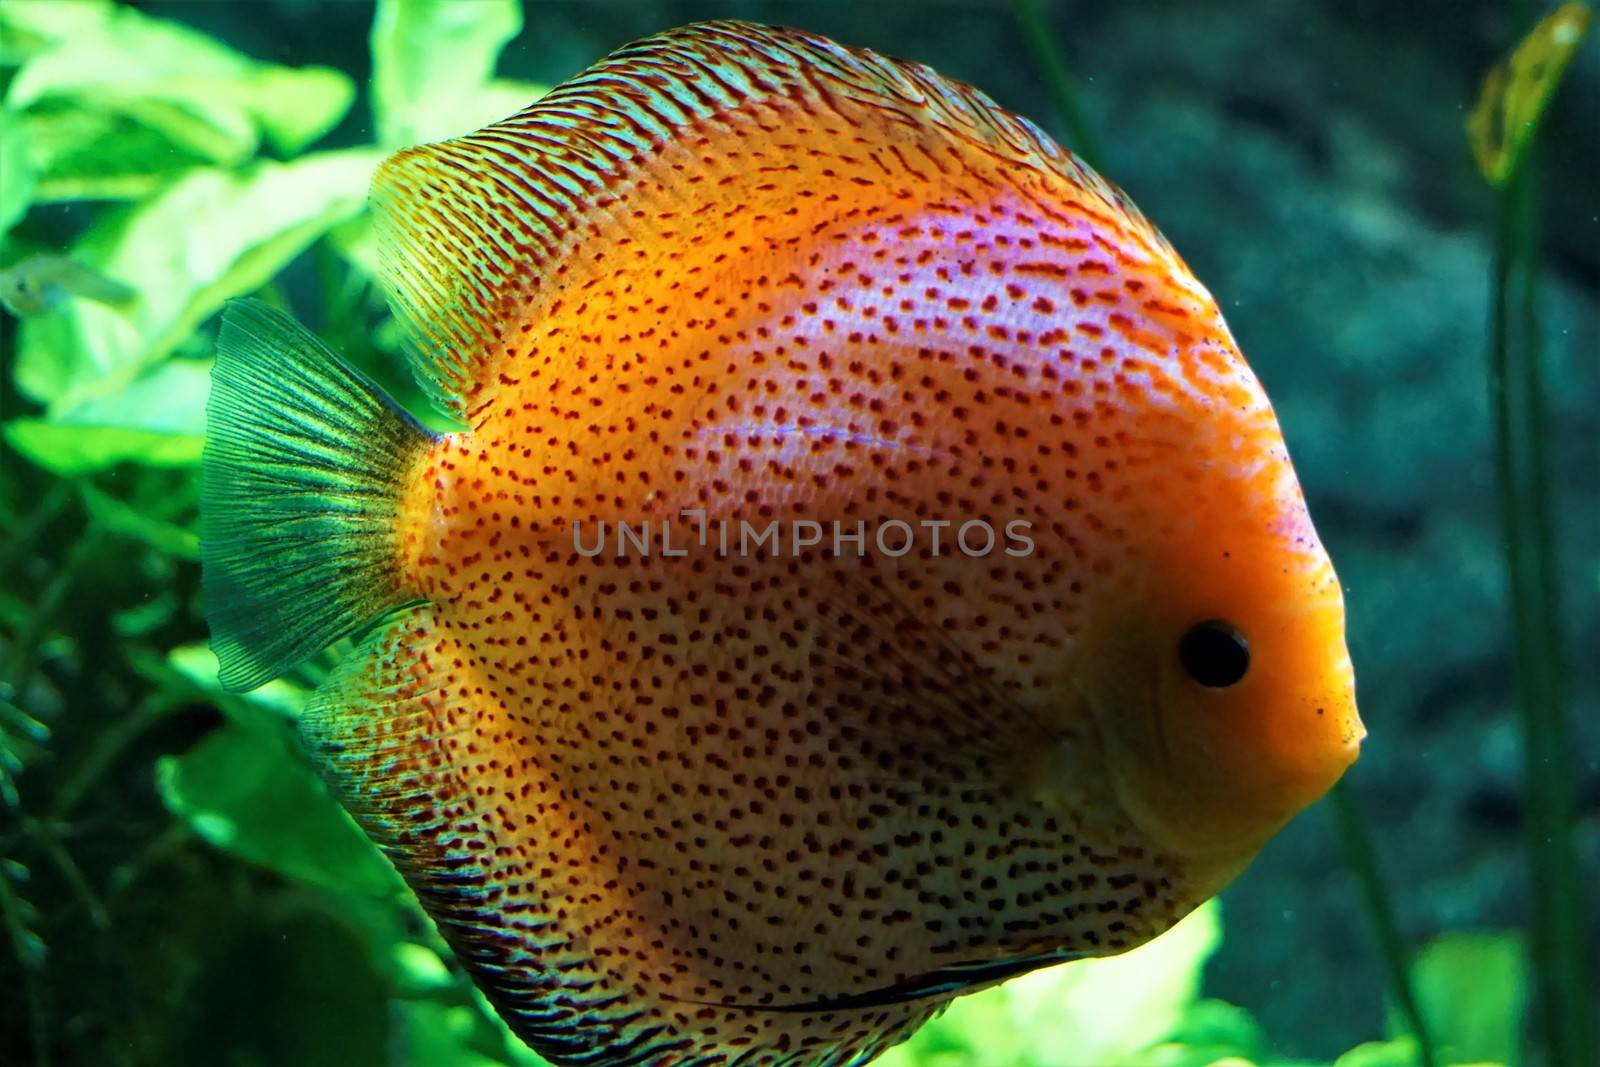 Discus fish swimming in the Karlsurhe zoo by pisces2386